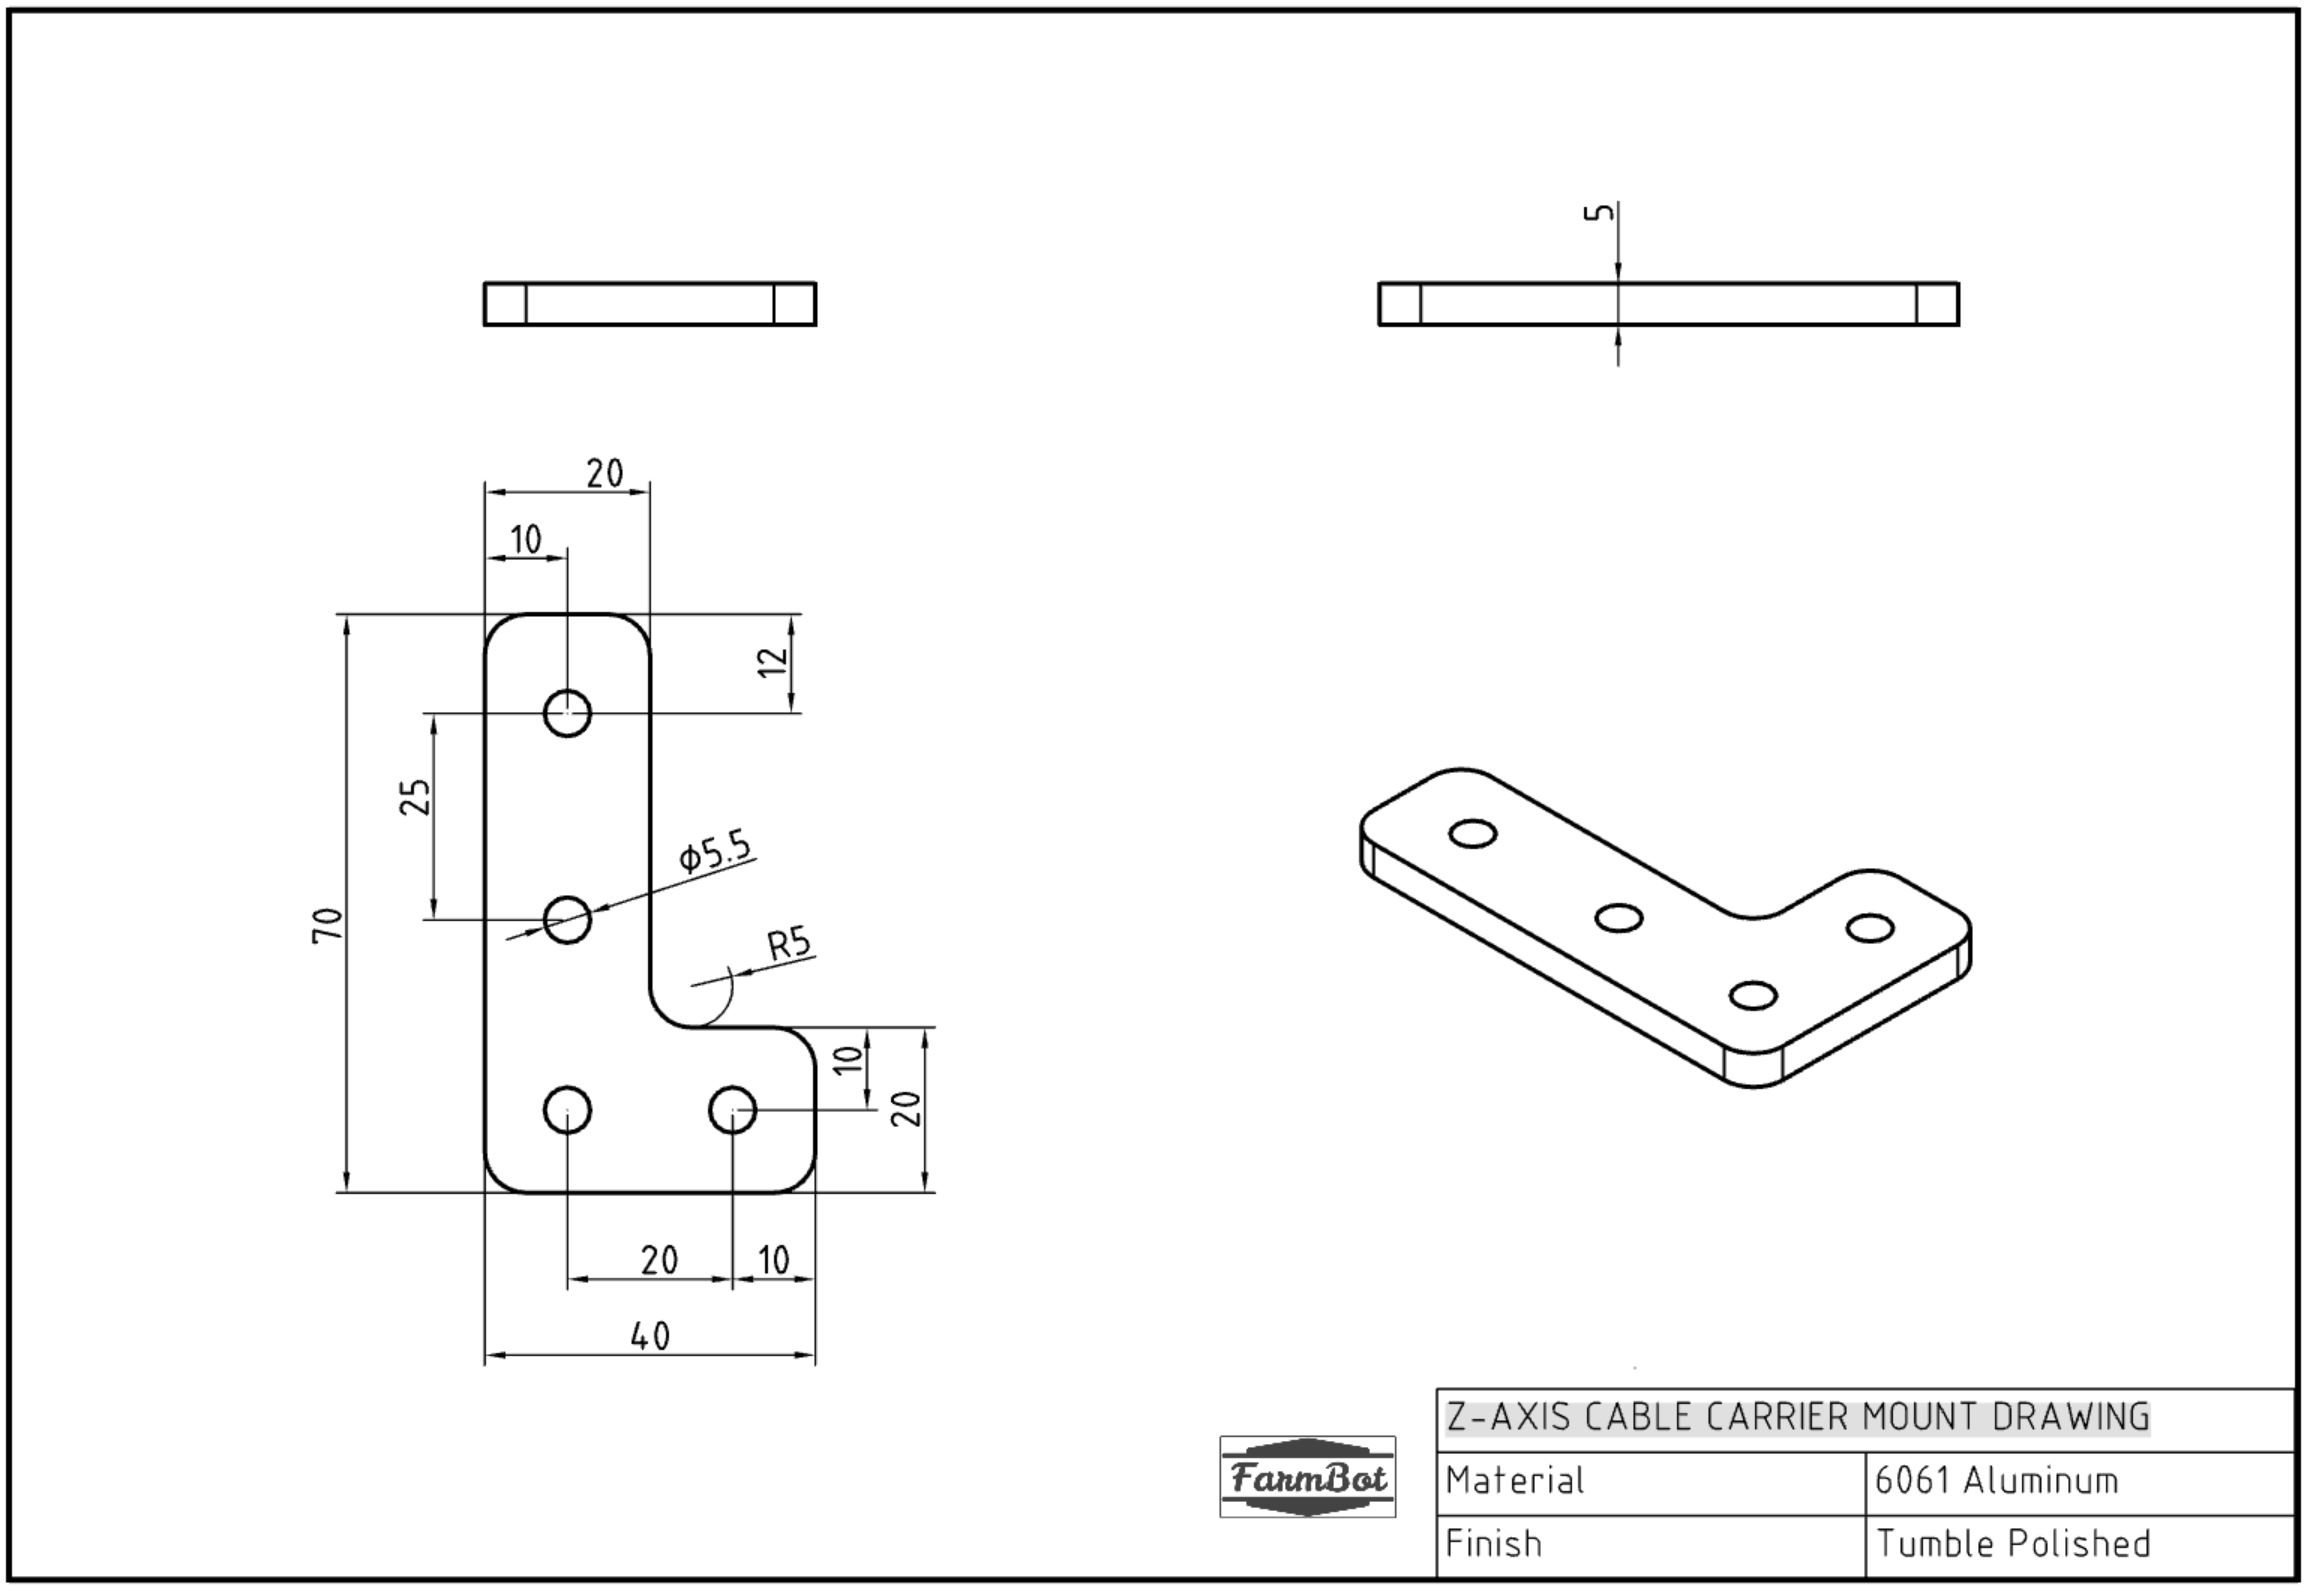 Z-Axis Cable Carrier Mount Drawing.JPG